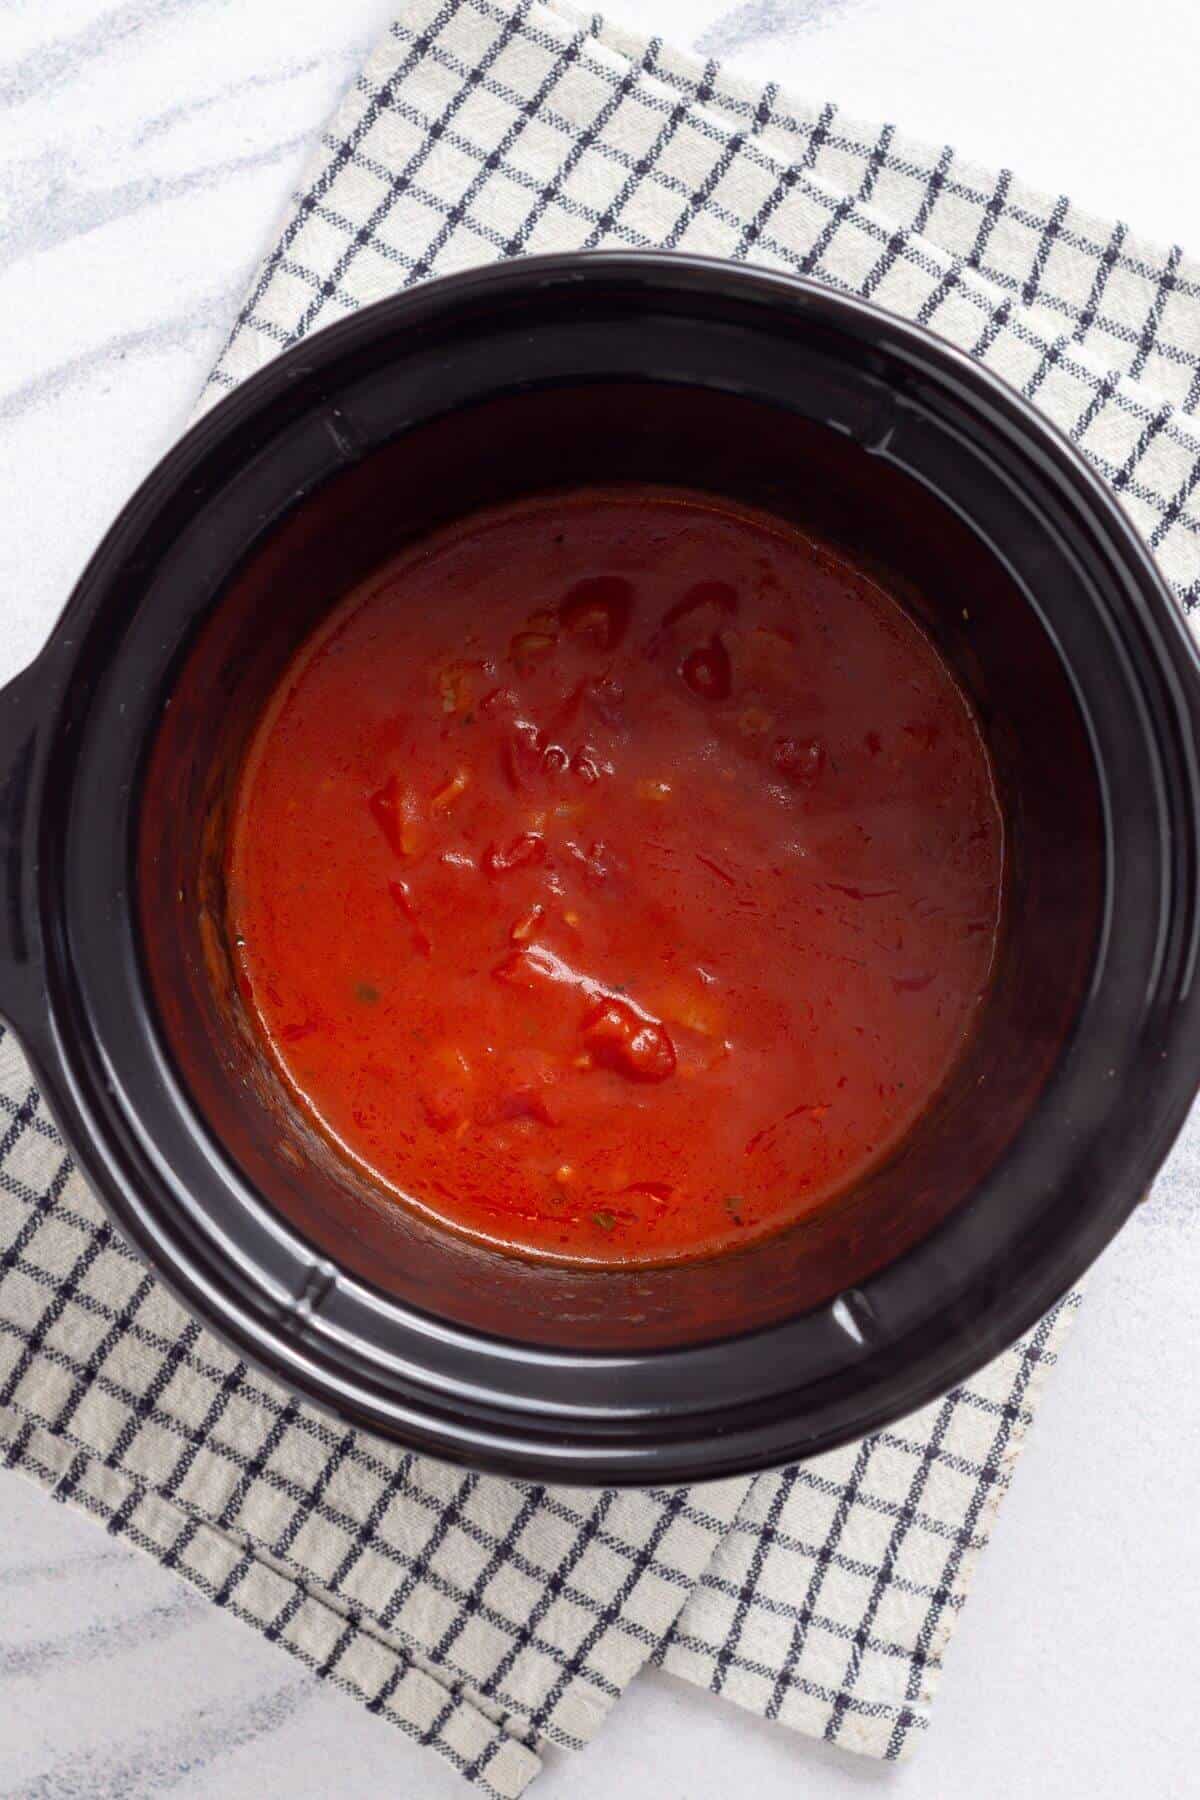 Tomato sauce cooking in a black slow cooker on a checkered cloth.